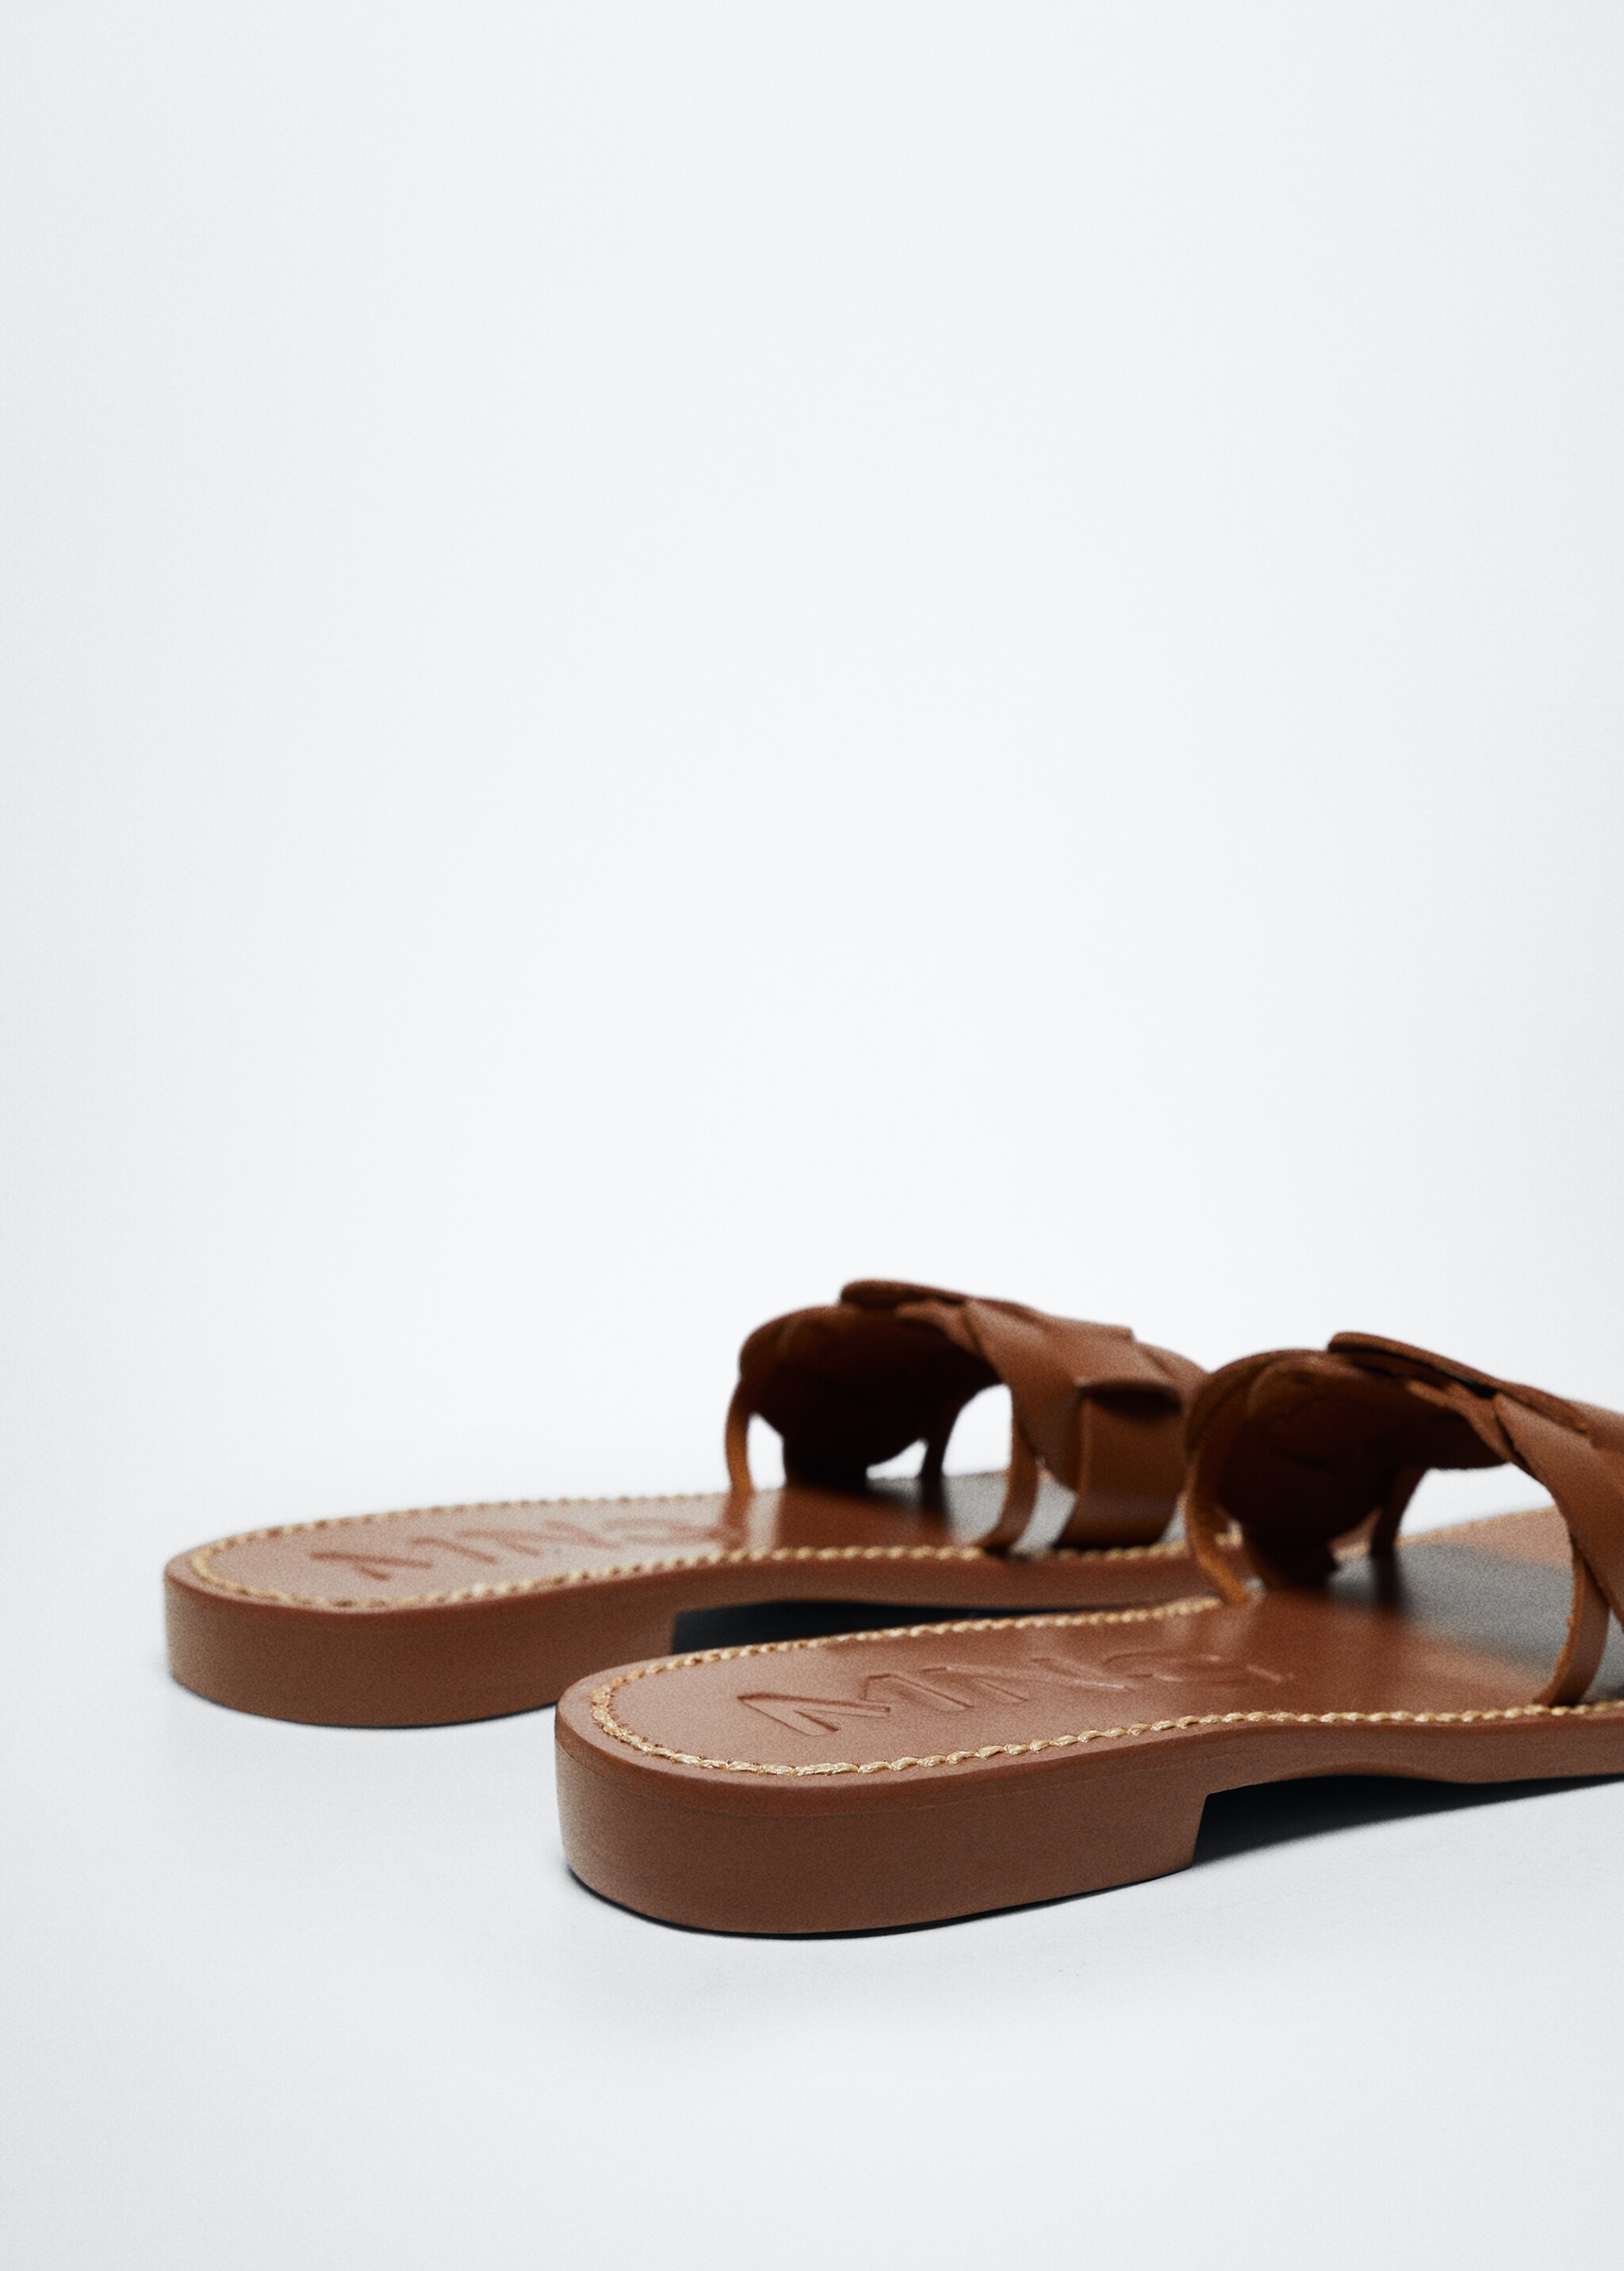 Leather braided sandals - Details of the article 2